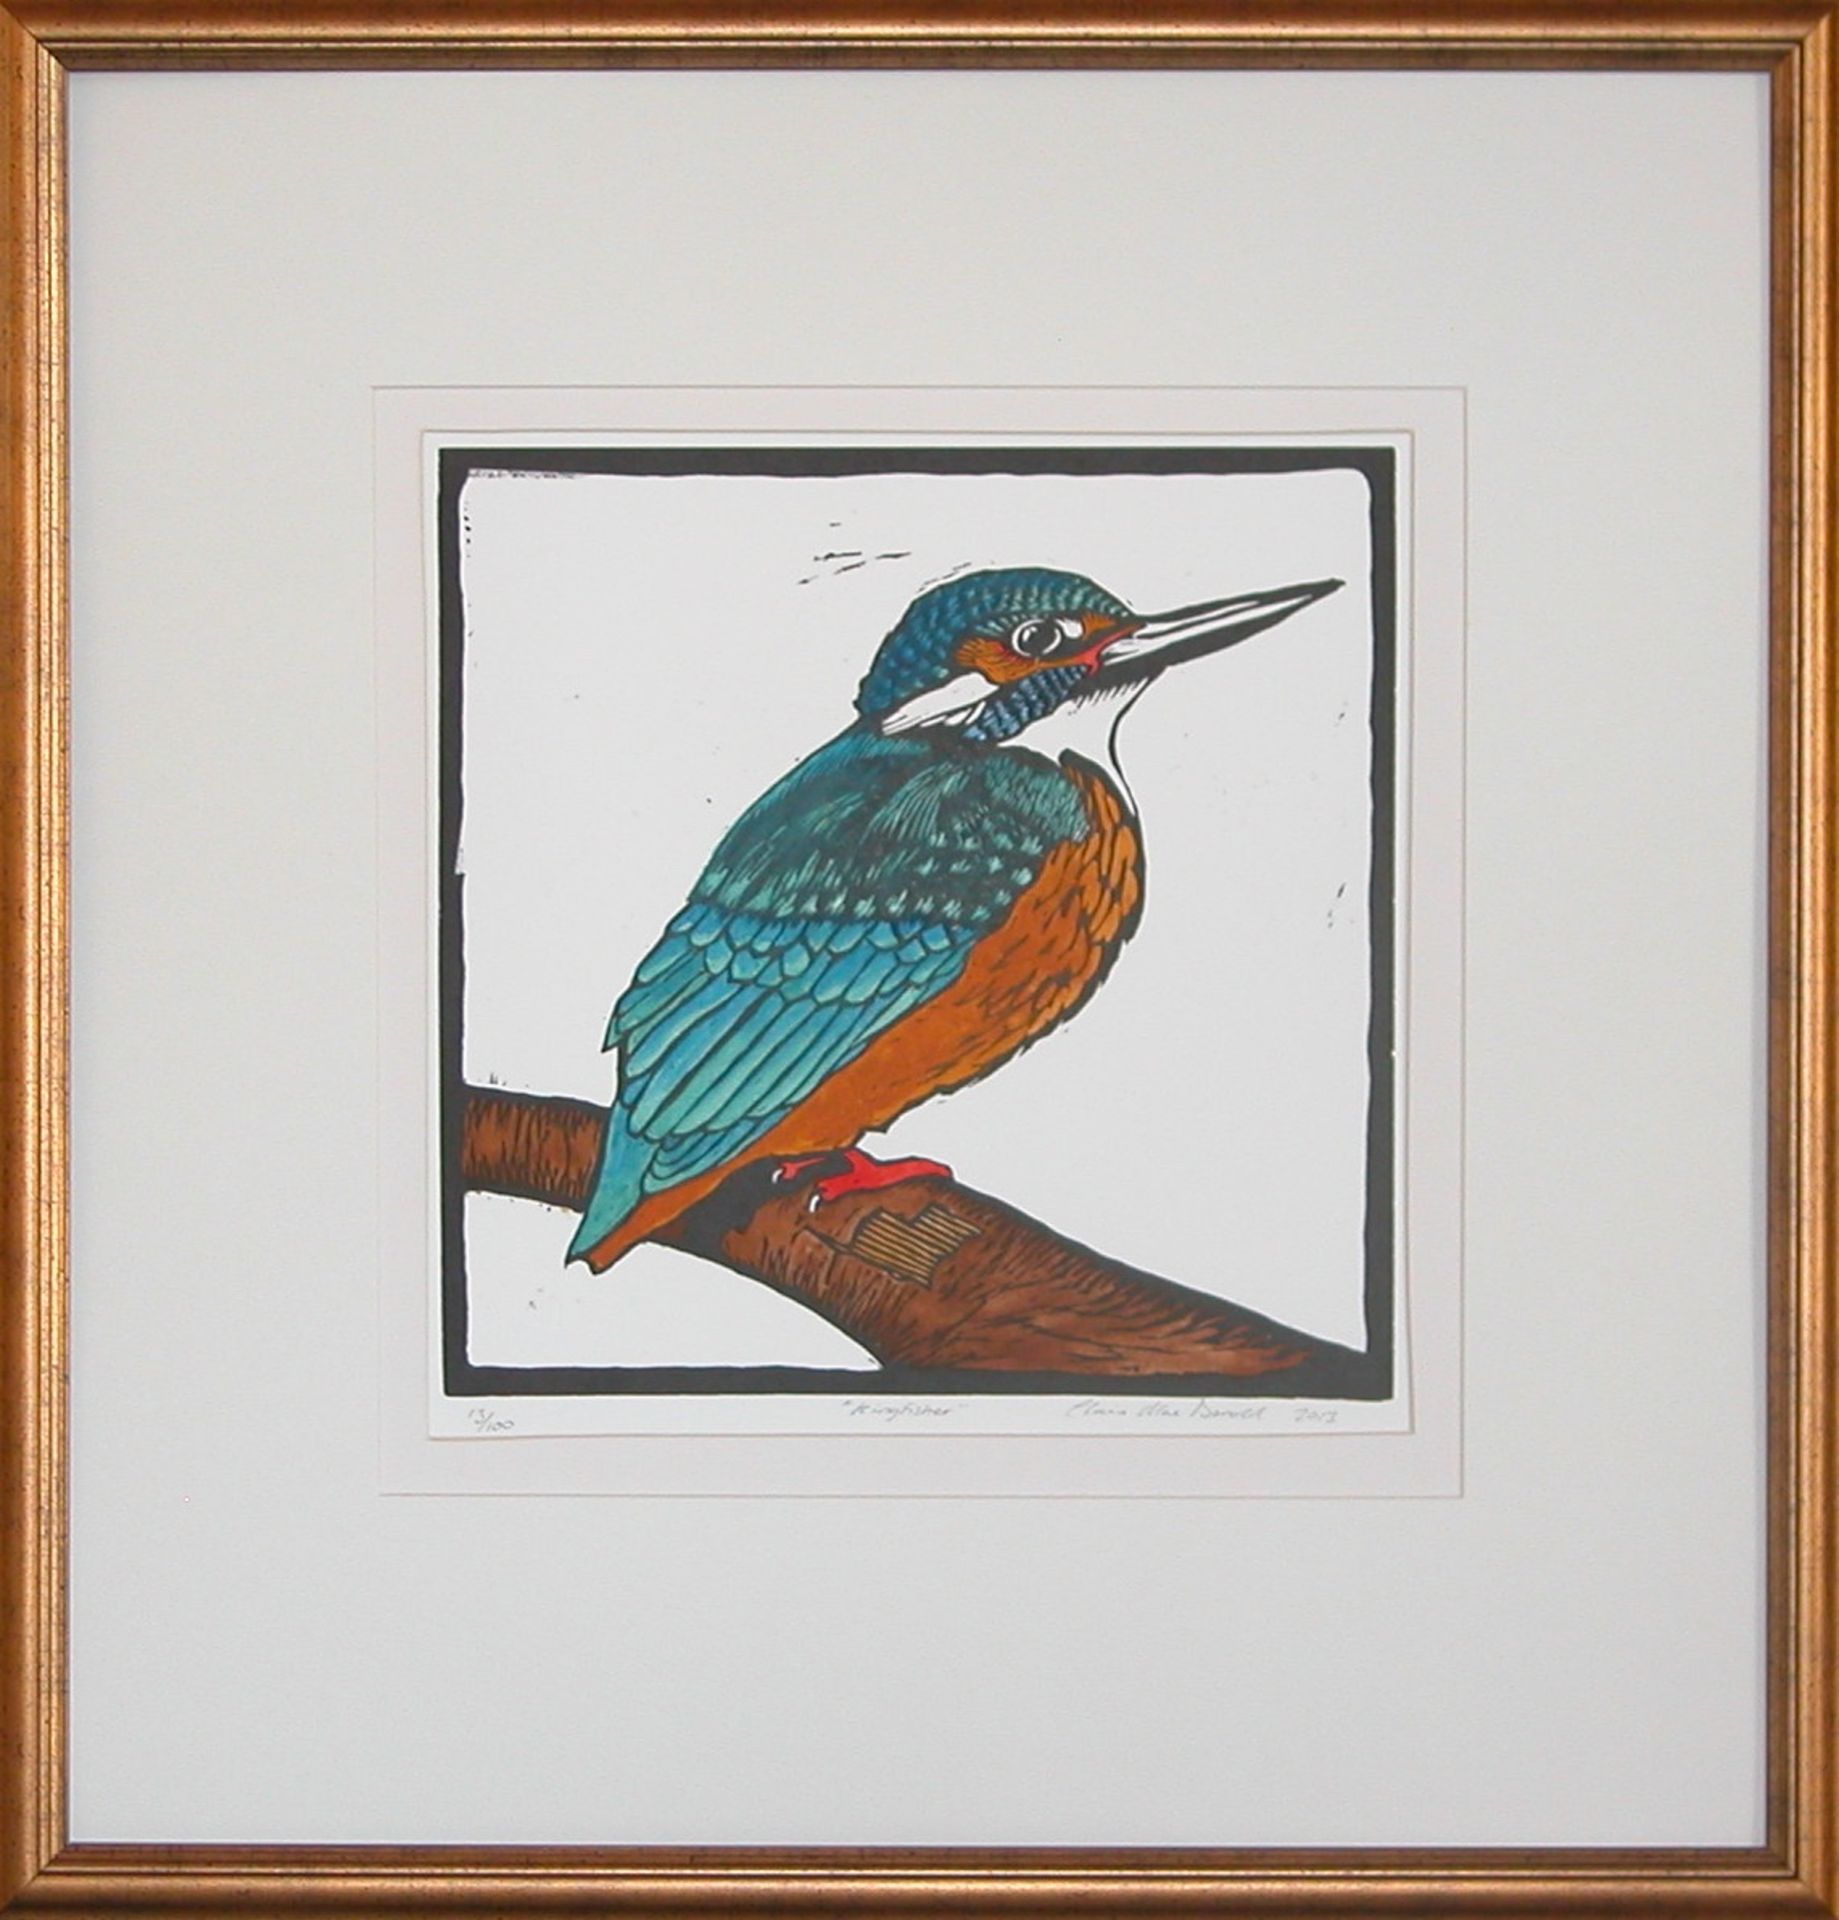 Claire Macdonald Signed, hand coloured wood block print "Kingfisher" - Image 2 of 3